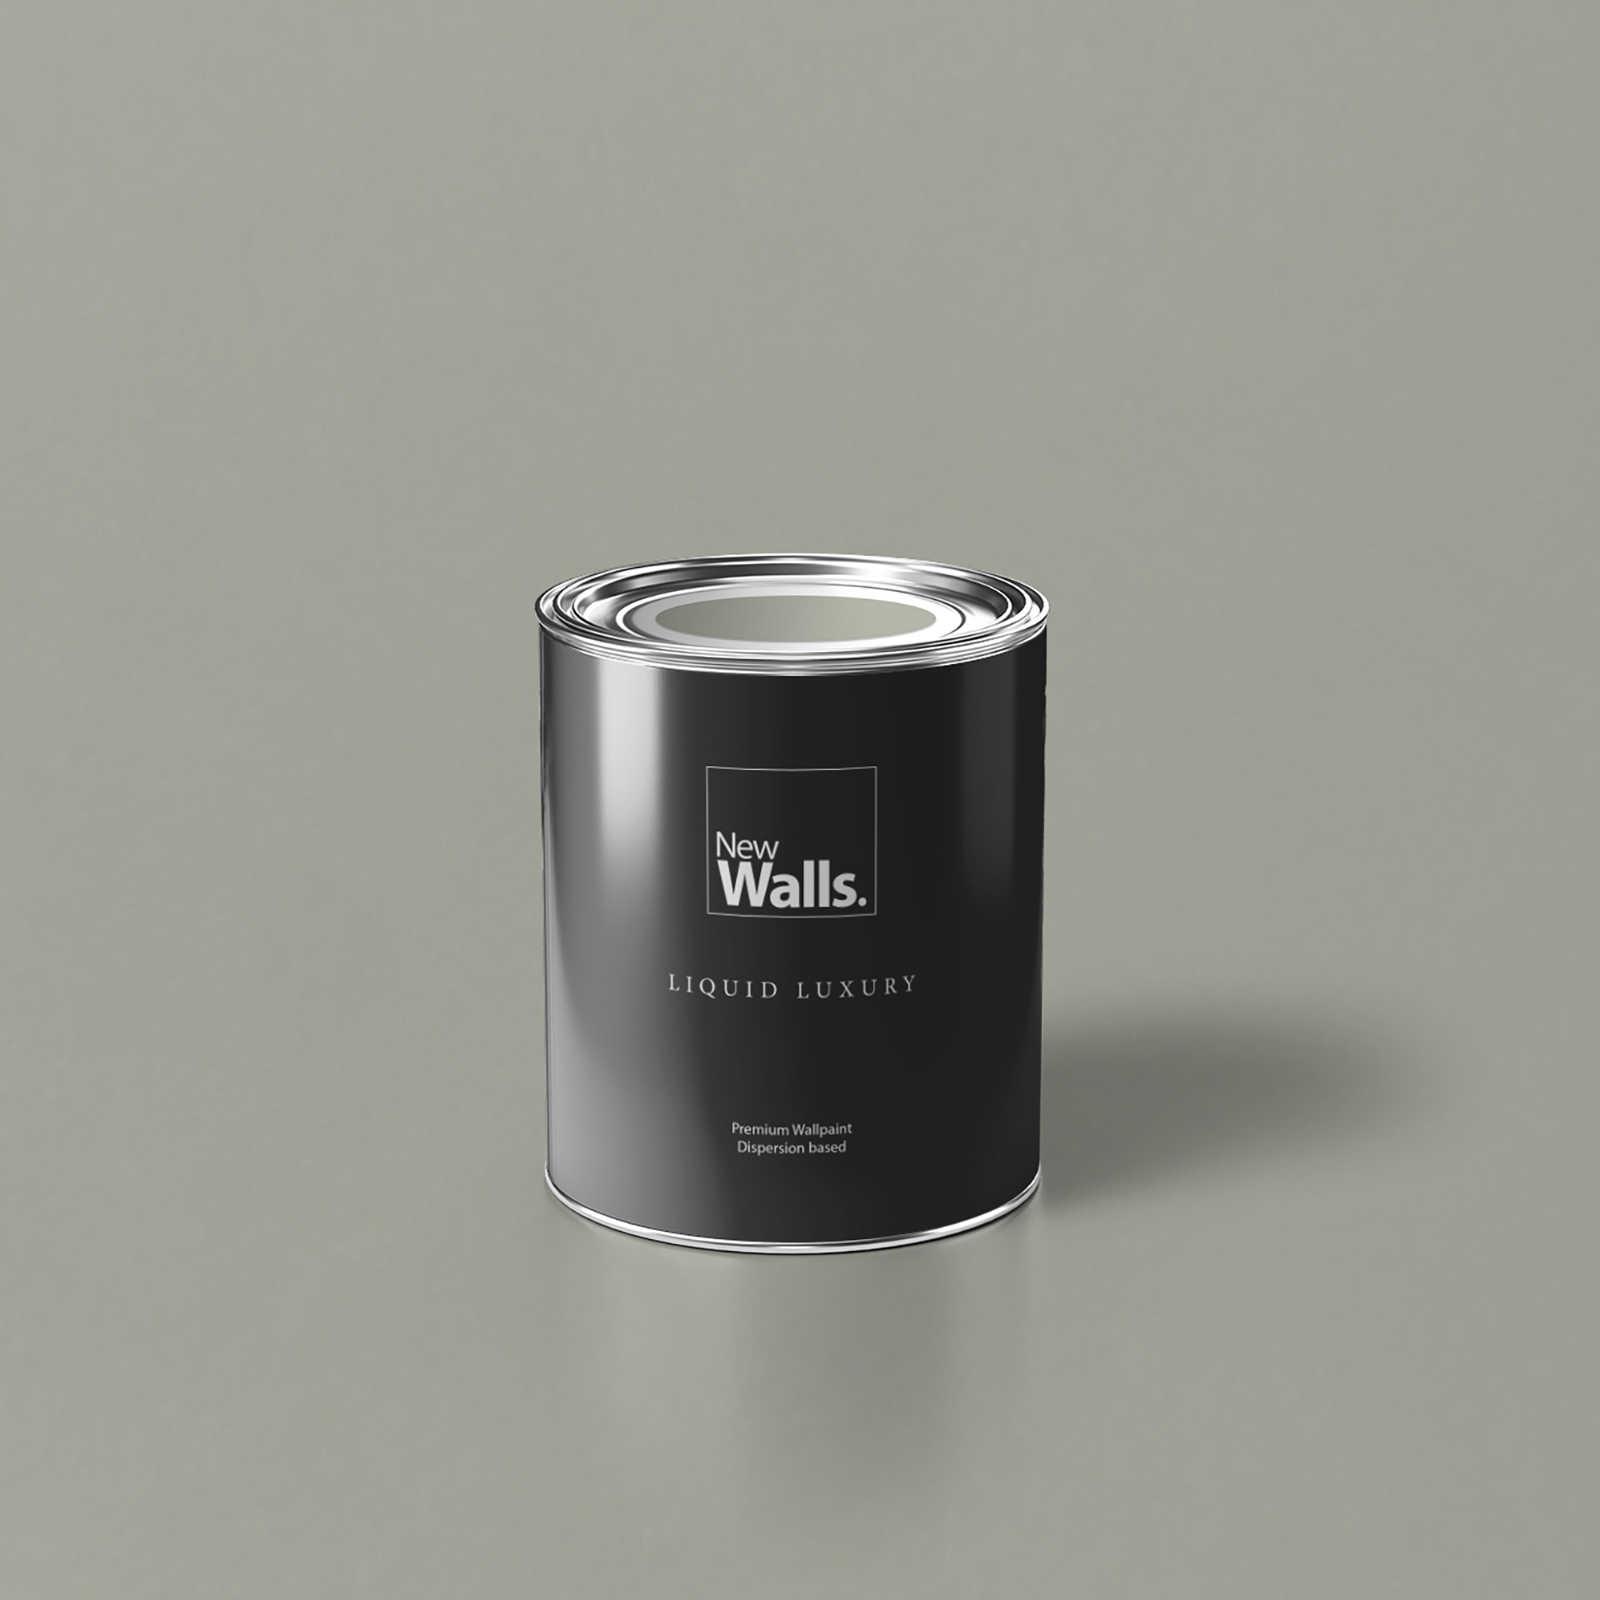 Premium Wall Paint Soft Olive Green »Talented calm taupe« NW705 – 1 litre
